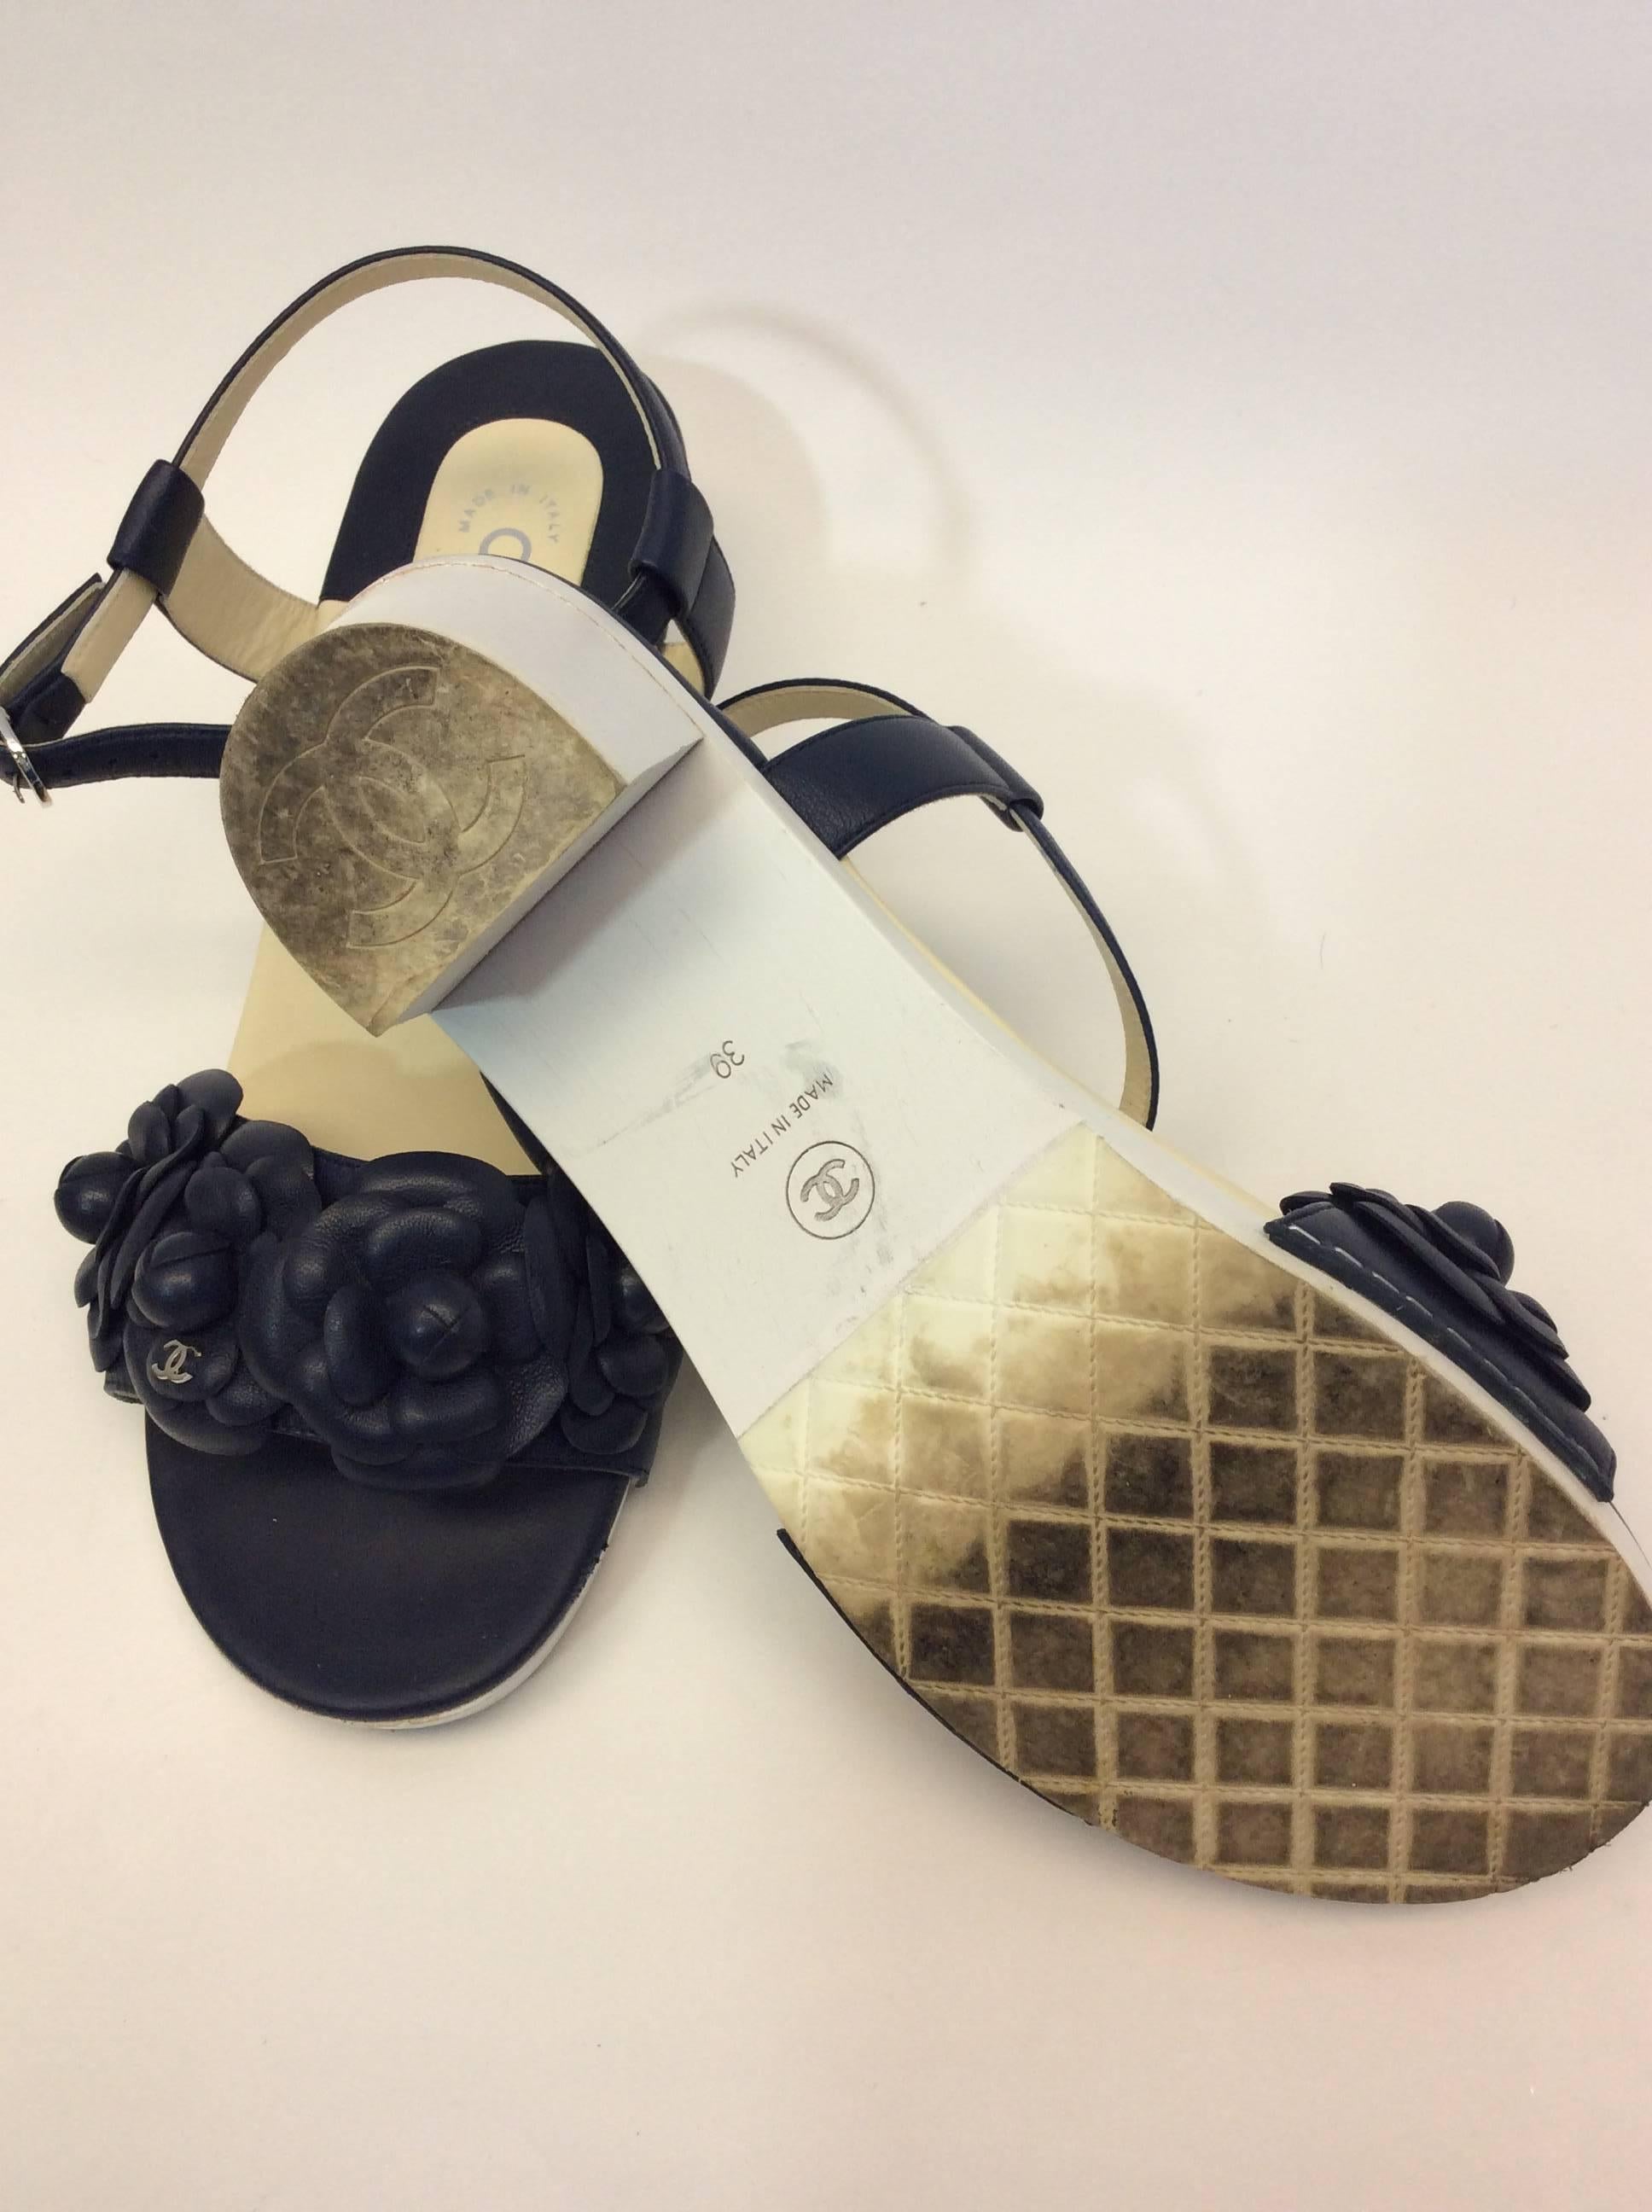 Navy Floral Strappy Sandal
2 inch heel
3.5 inch sole width
Adjustable buckled ankle strap
Chanel logo flower detail on toe strap
Size 39
Wood heel, leather upper and lining